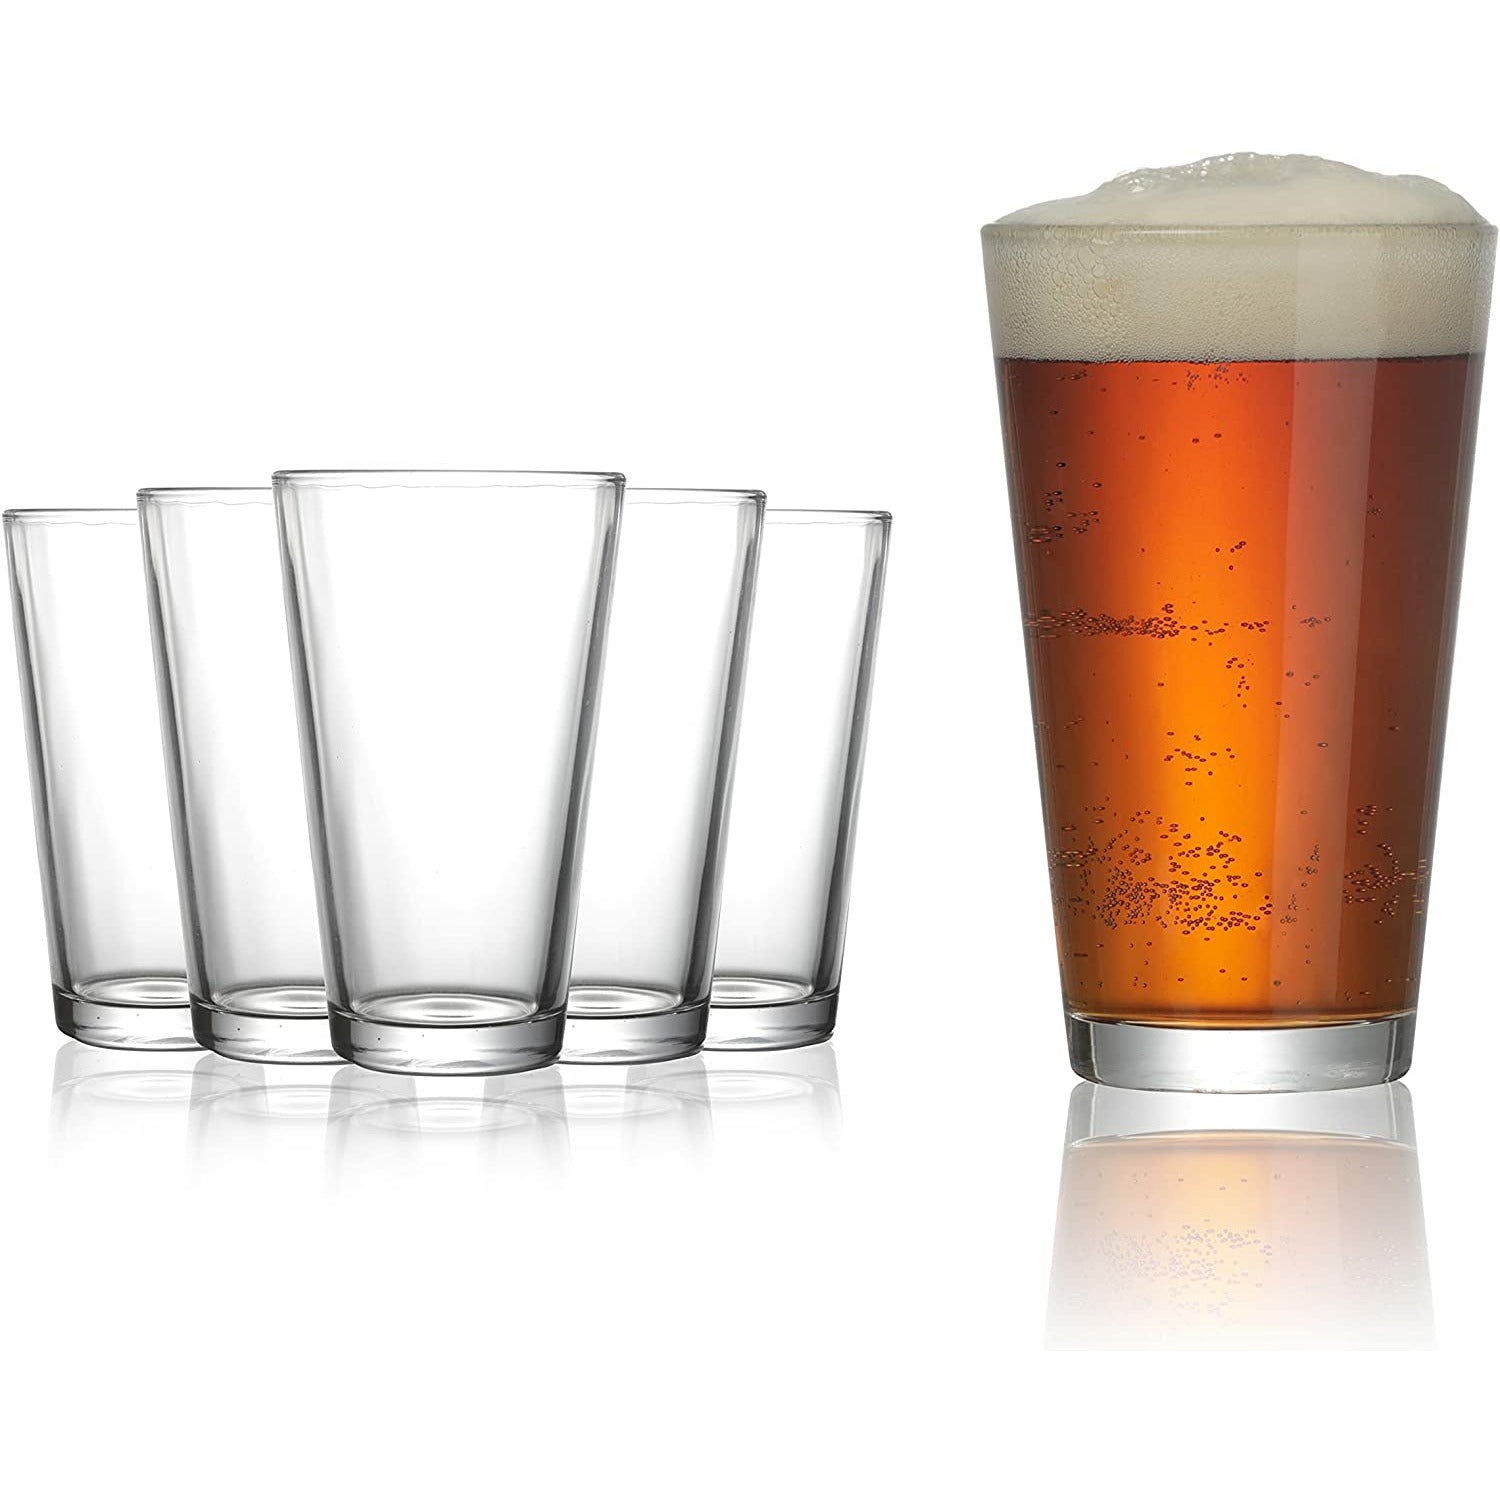 Pint Glassware - 16 oz. Beer Pint Glasses for Sale – Cheers All